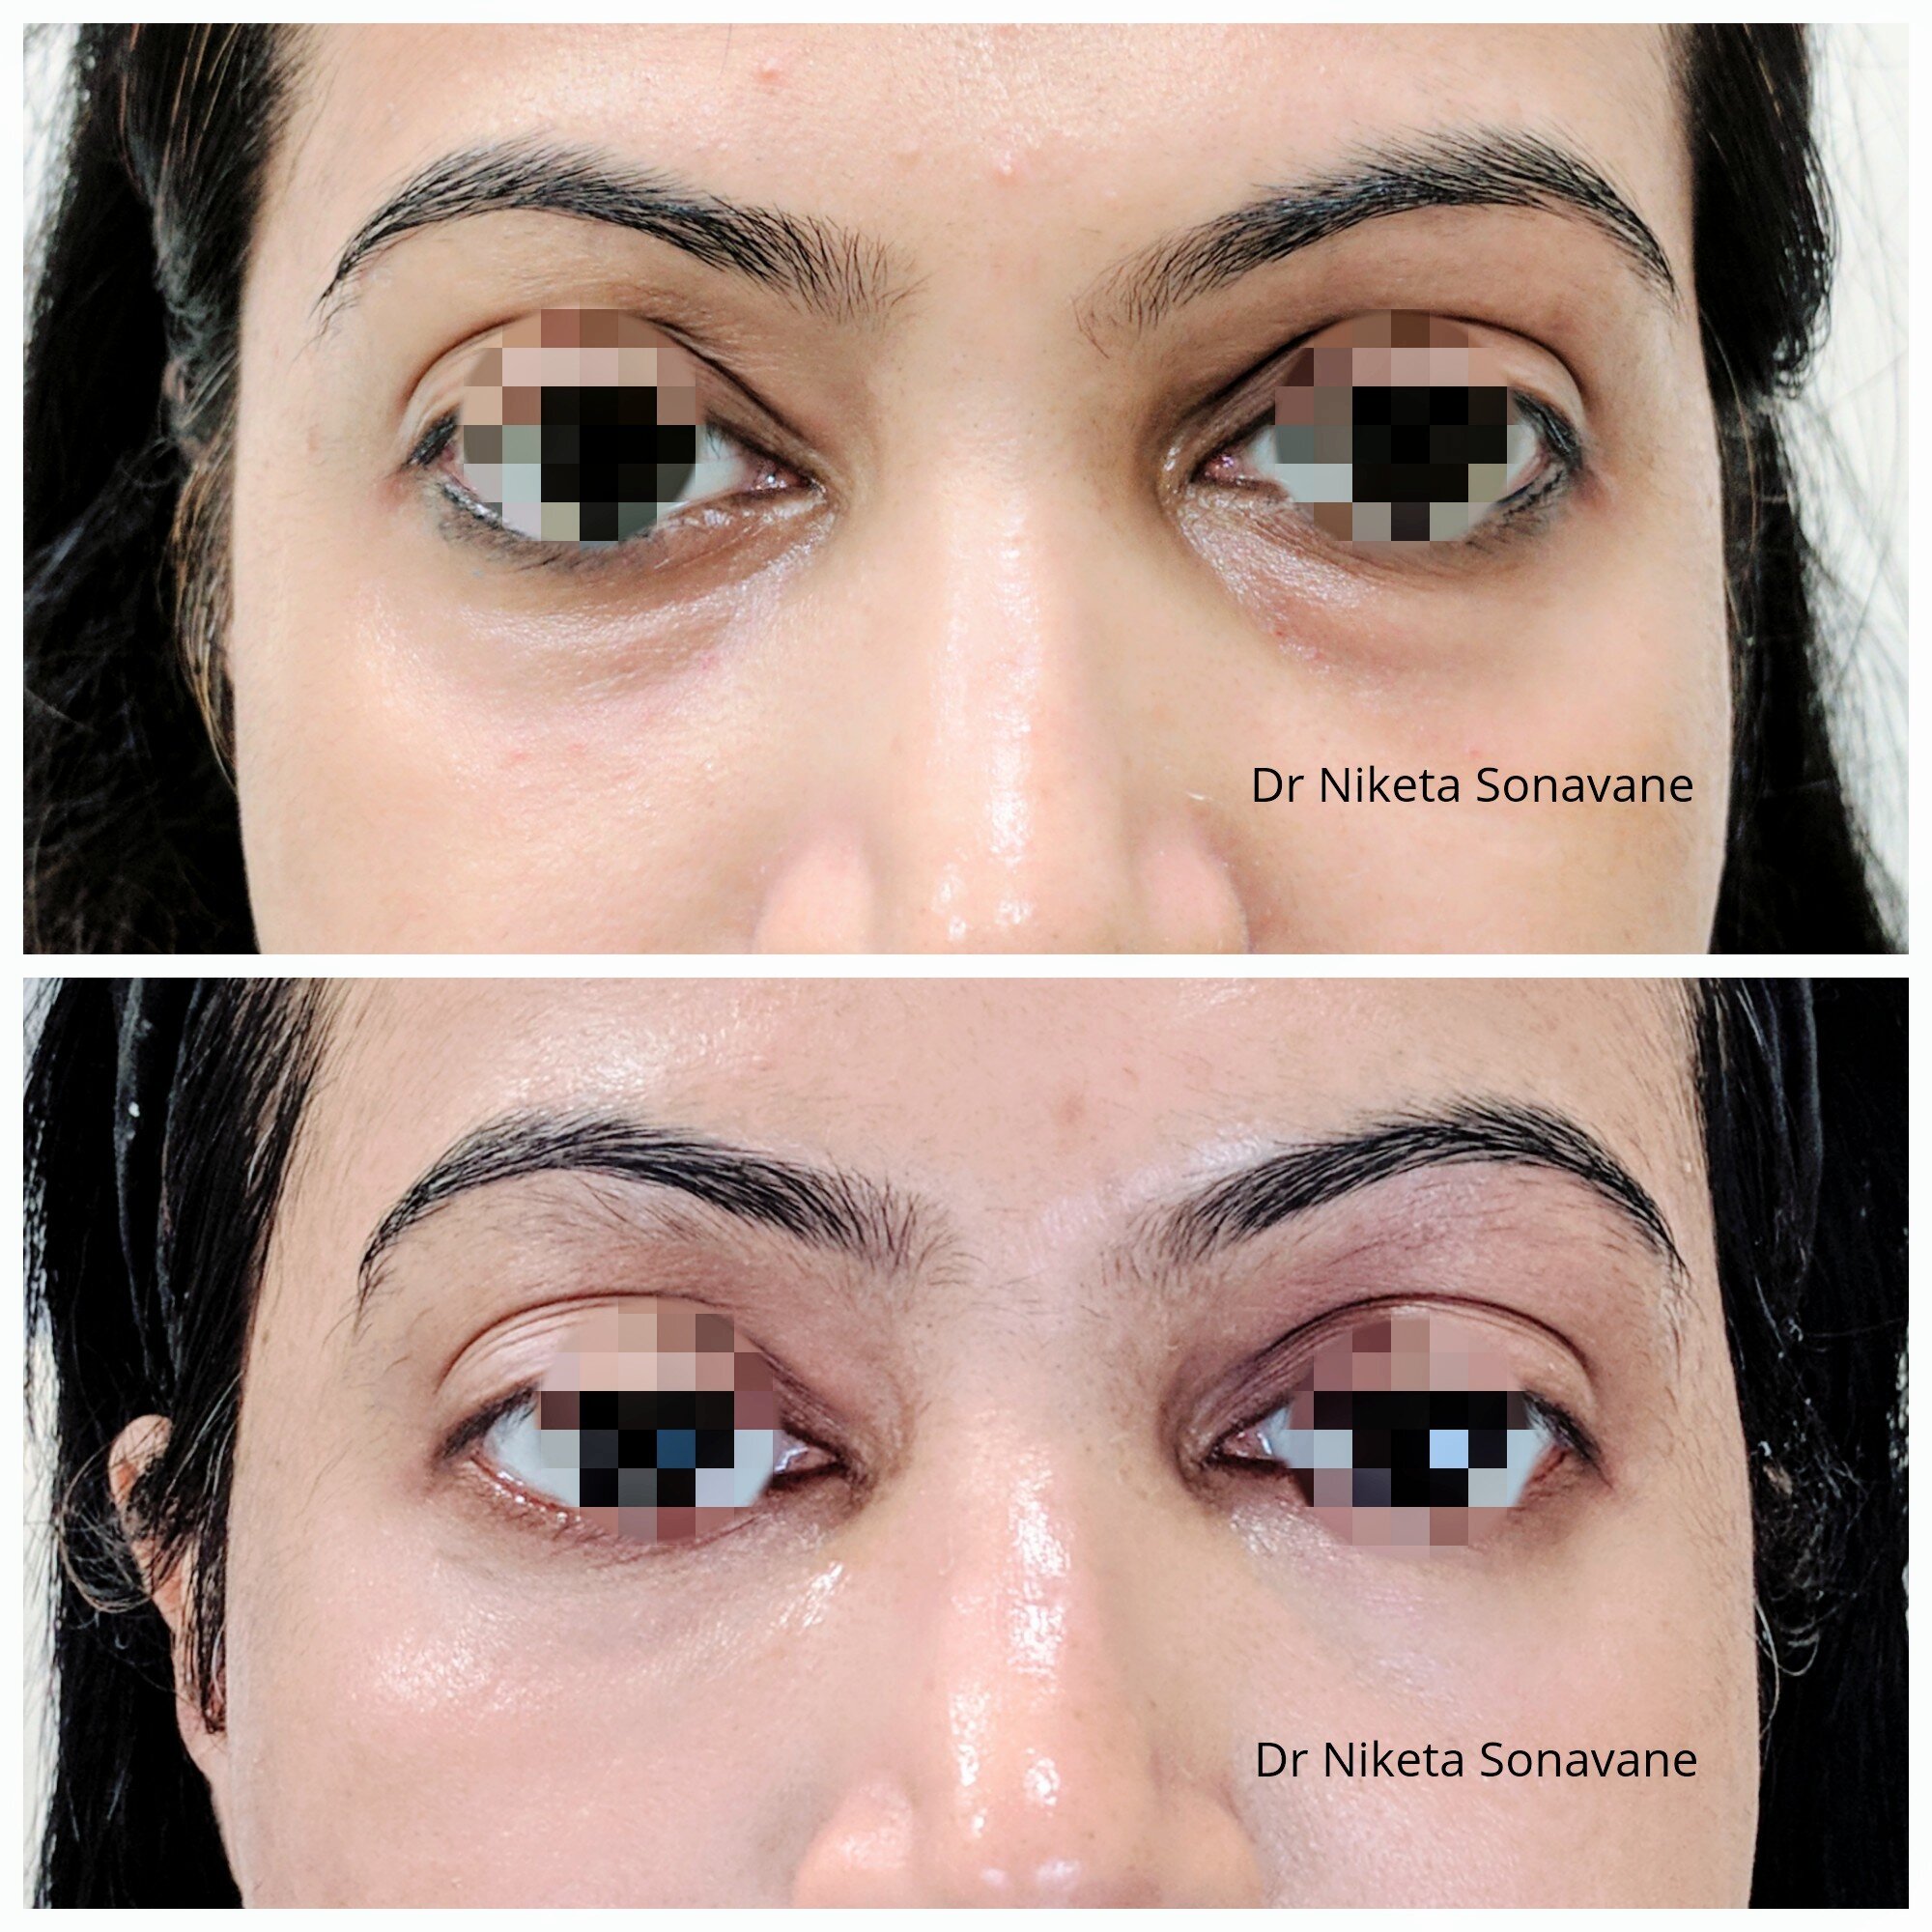 Bumps Under the Eyes - Causes and Treatment